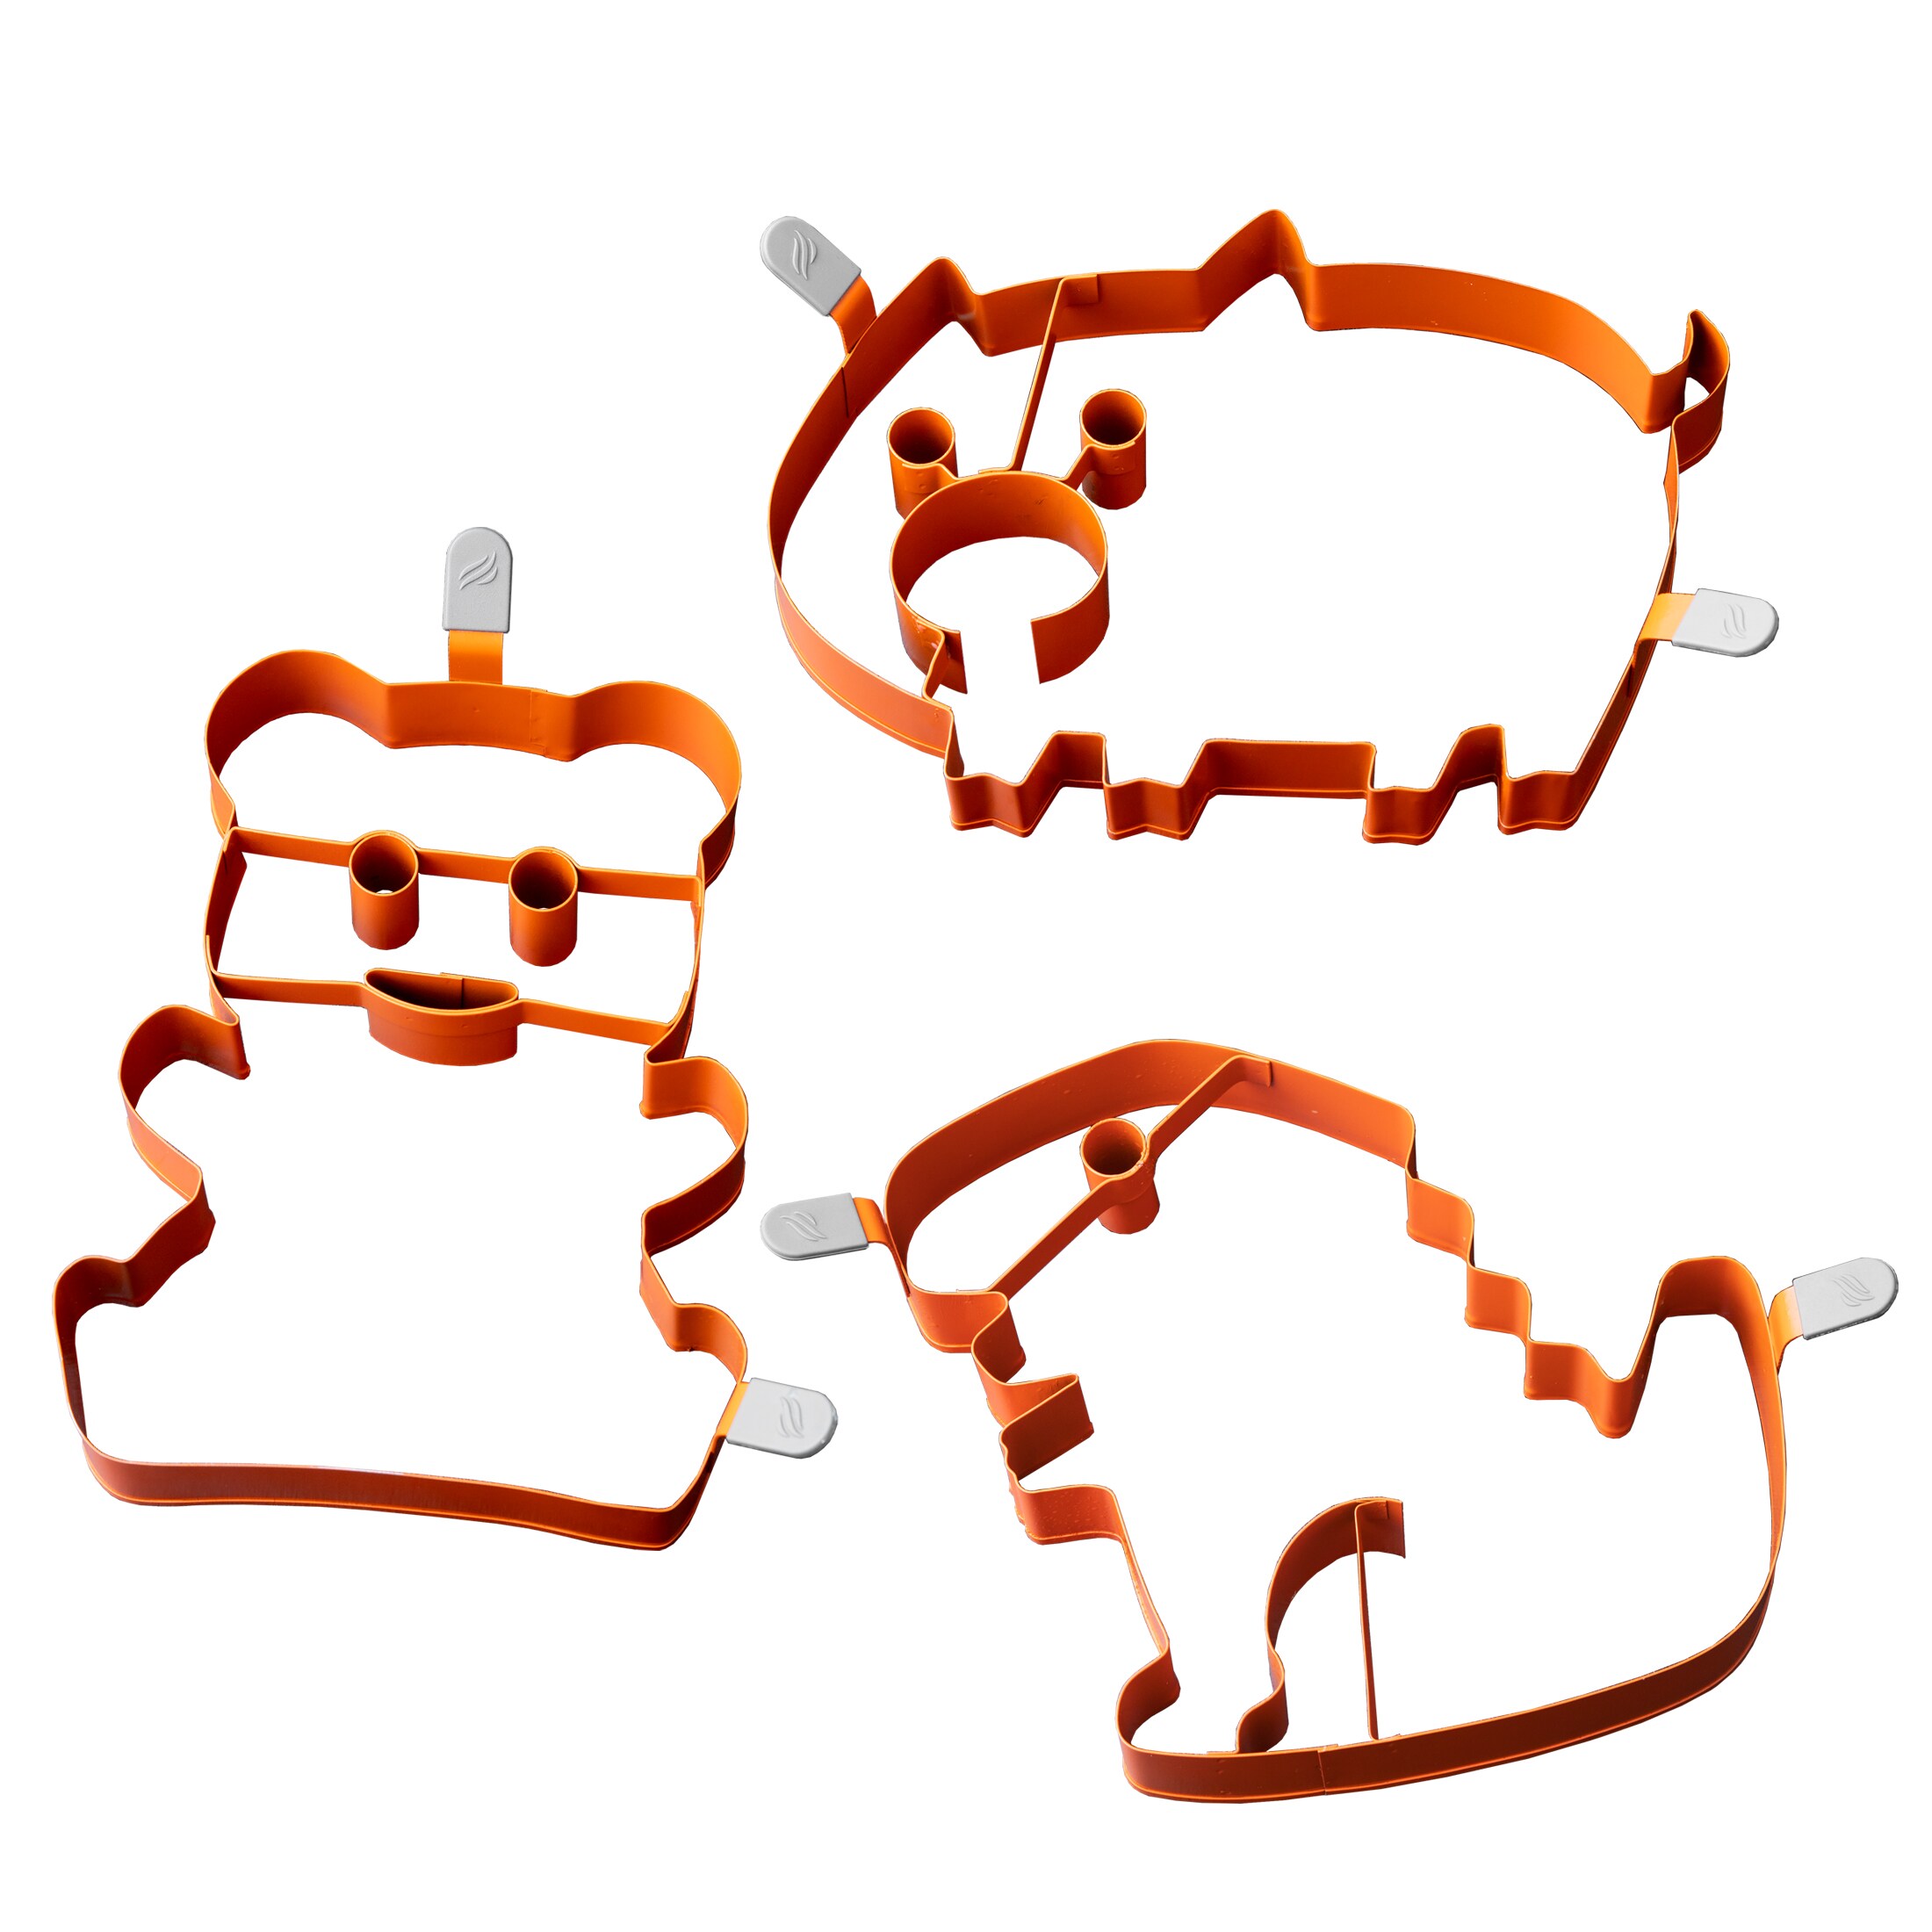 3 x 3.5 Stainless Steel Teddy Bear Cookie Cutter by STIR